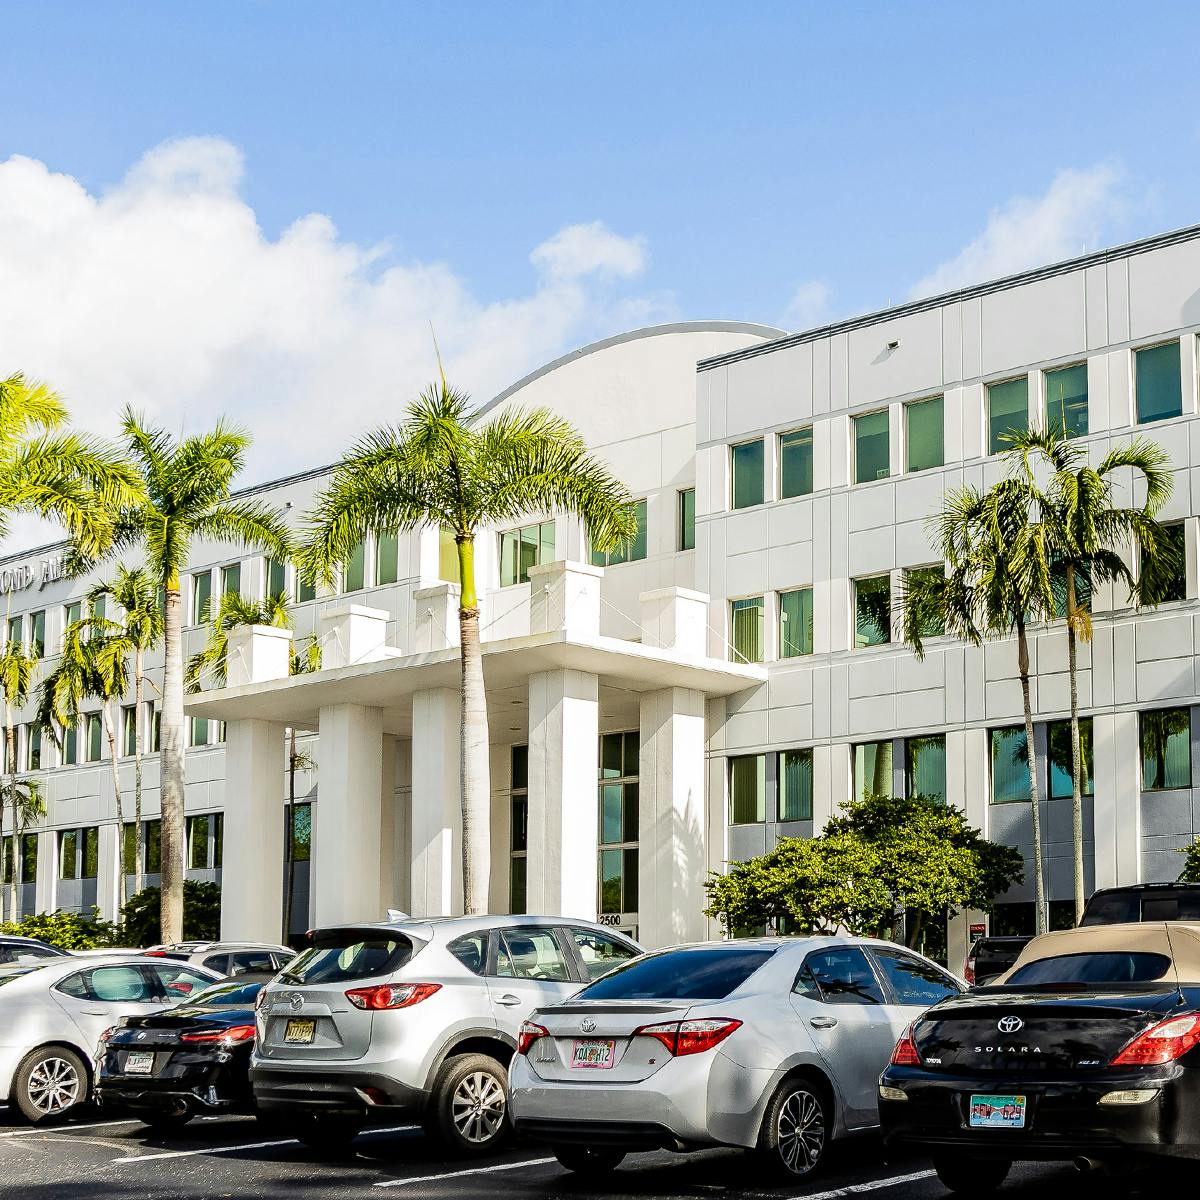 Ear, nose and throat office in Weston, FL - SFENTA